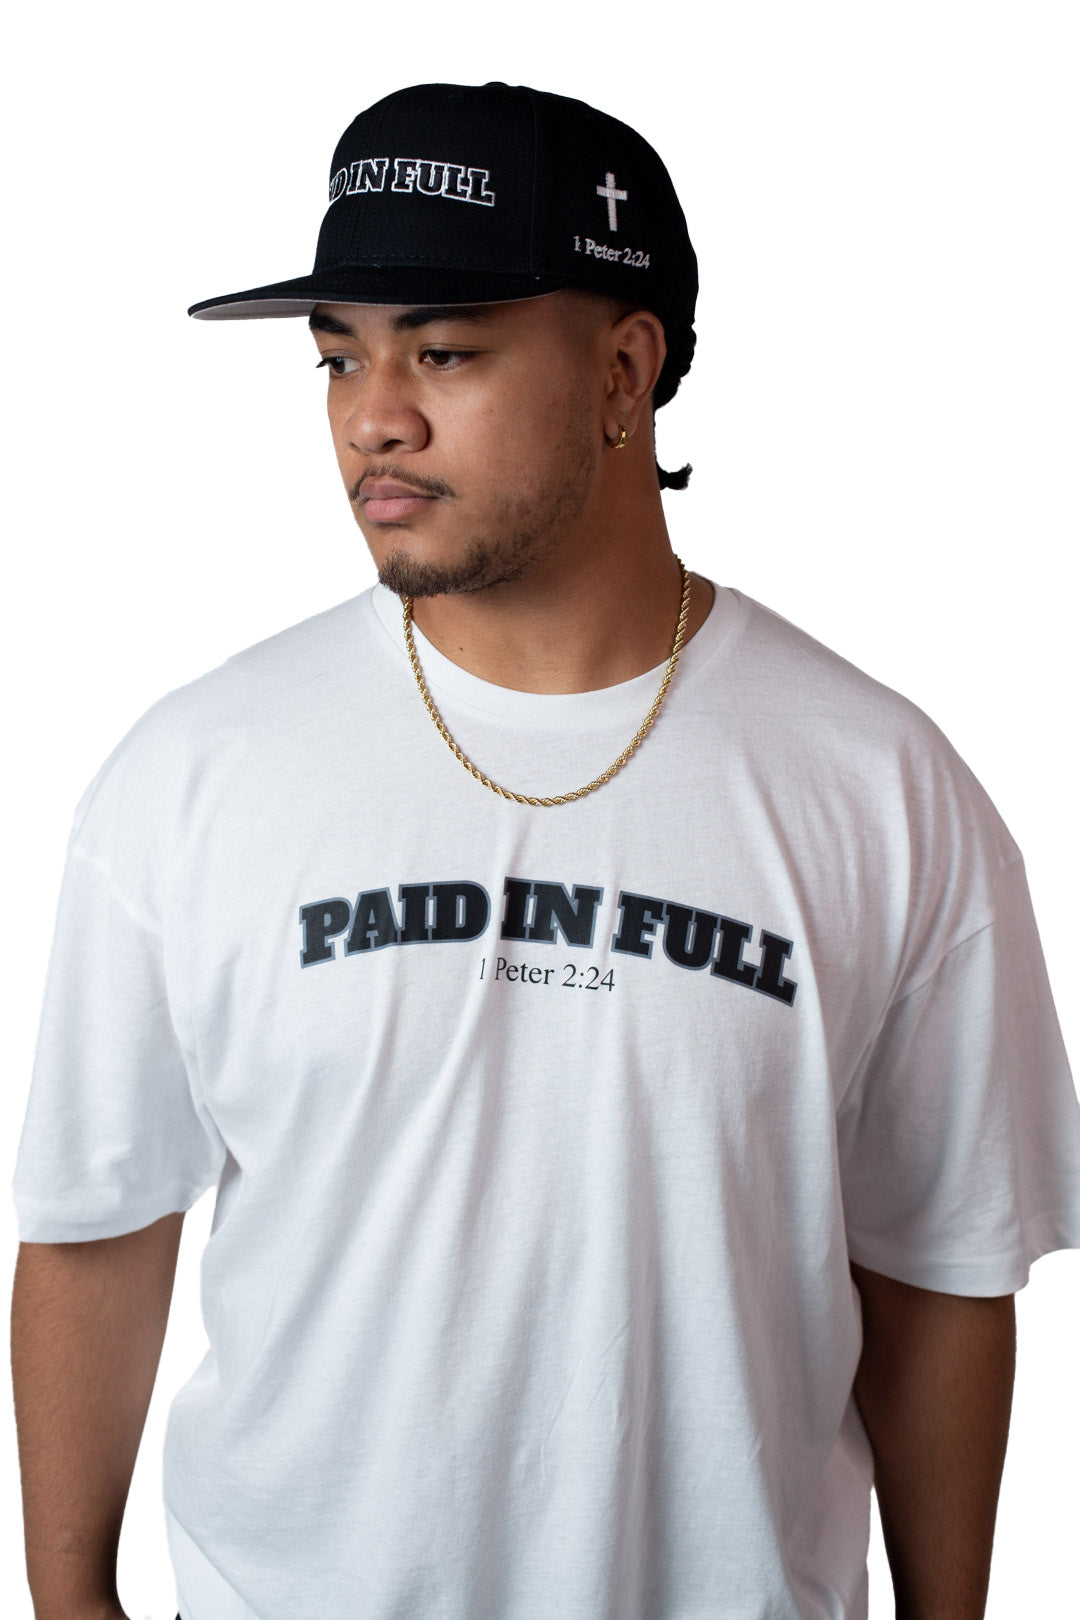 paid in full tshirt by army of god attire christian clothing